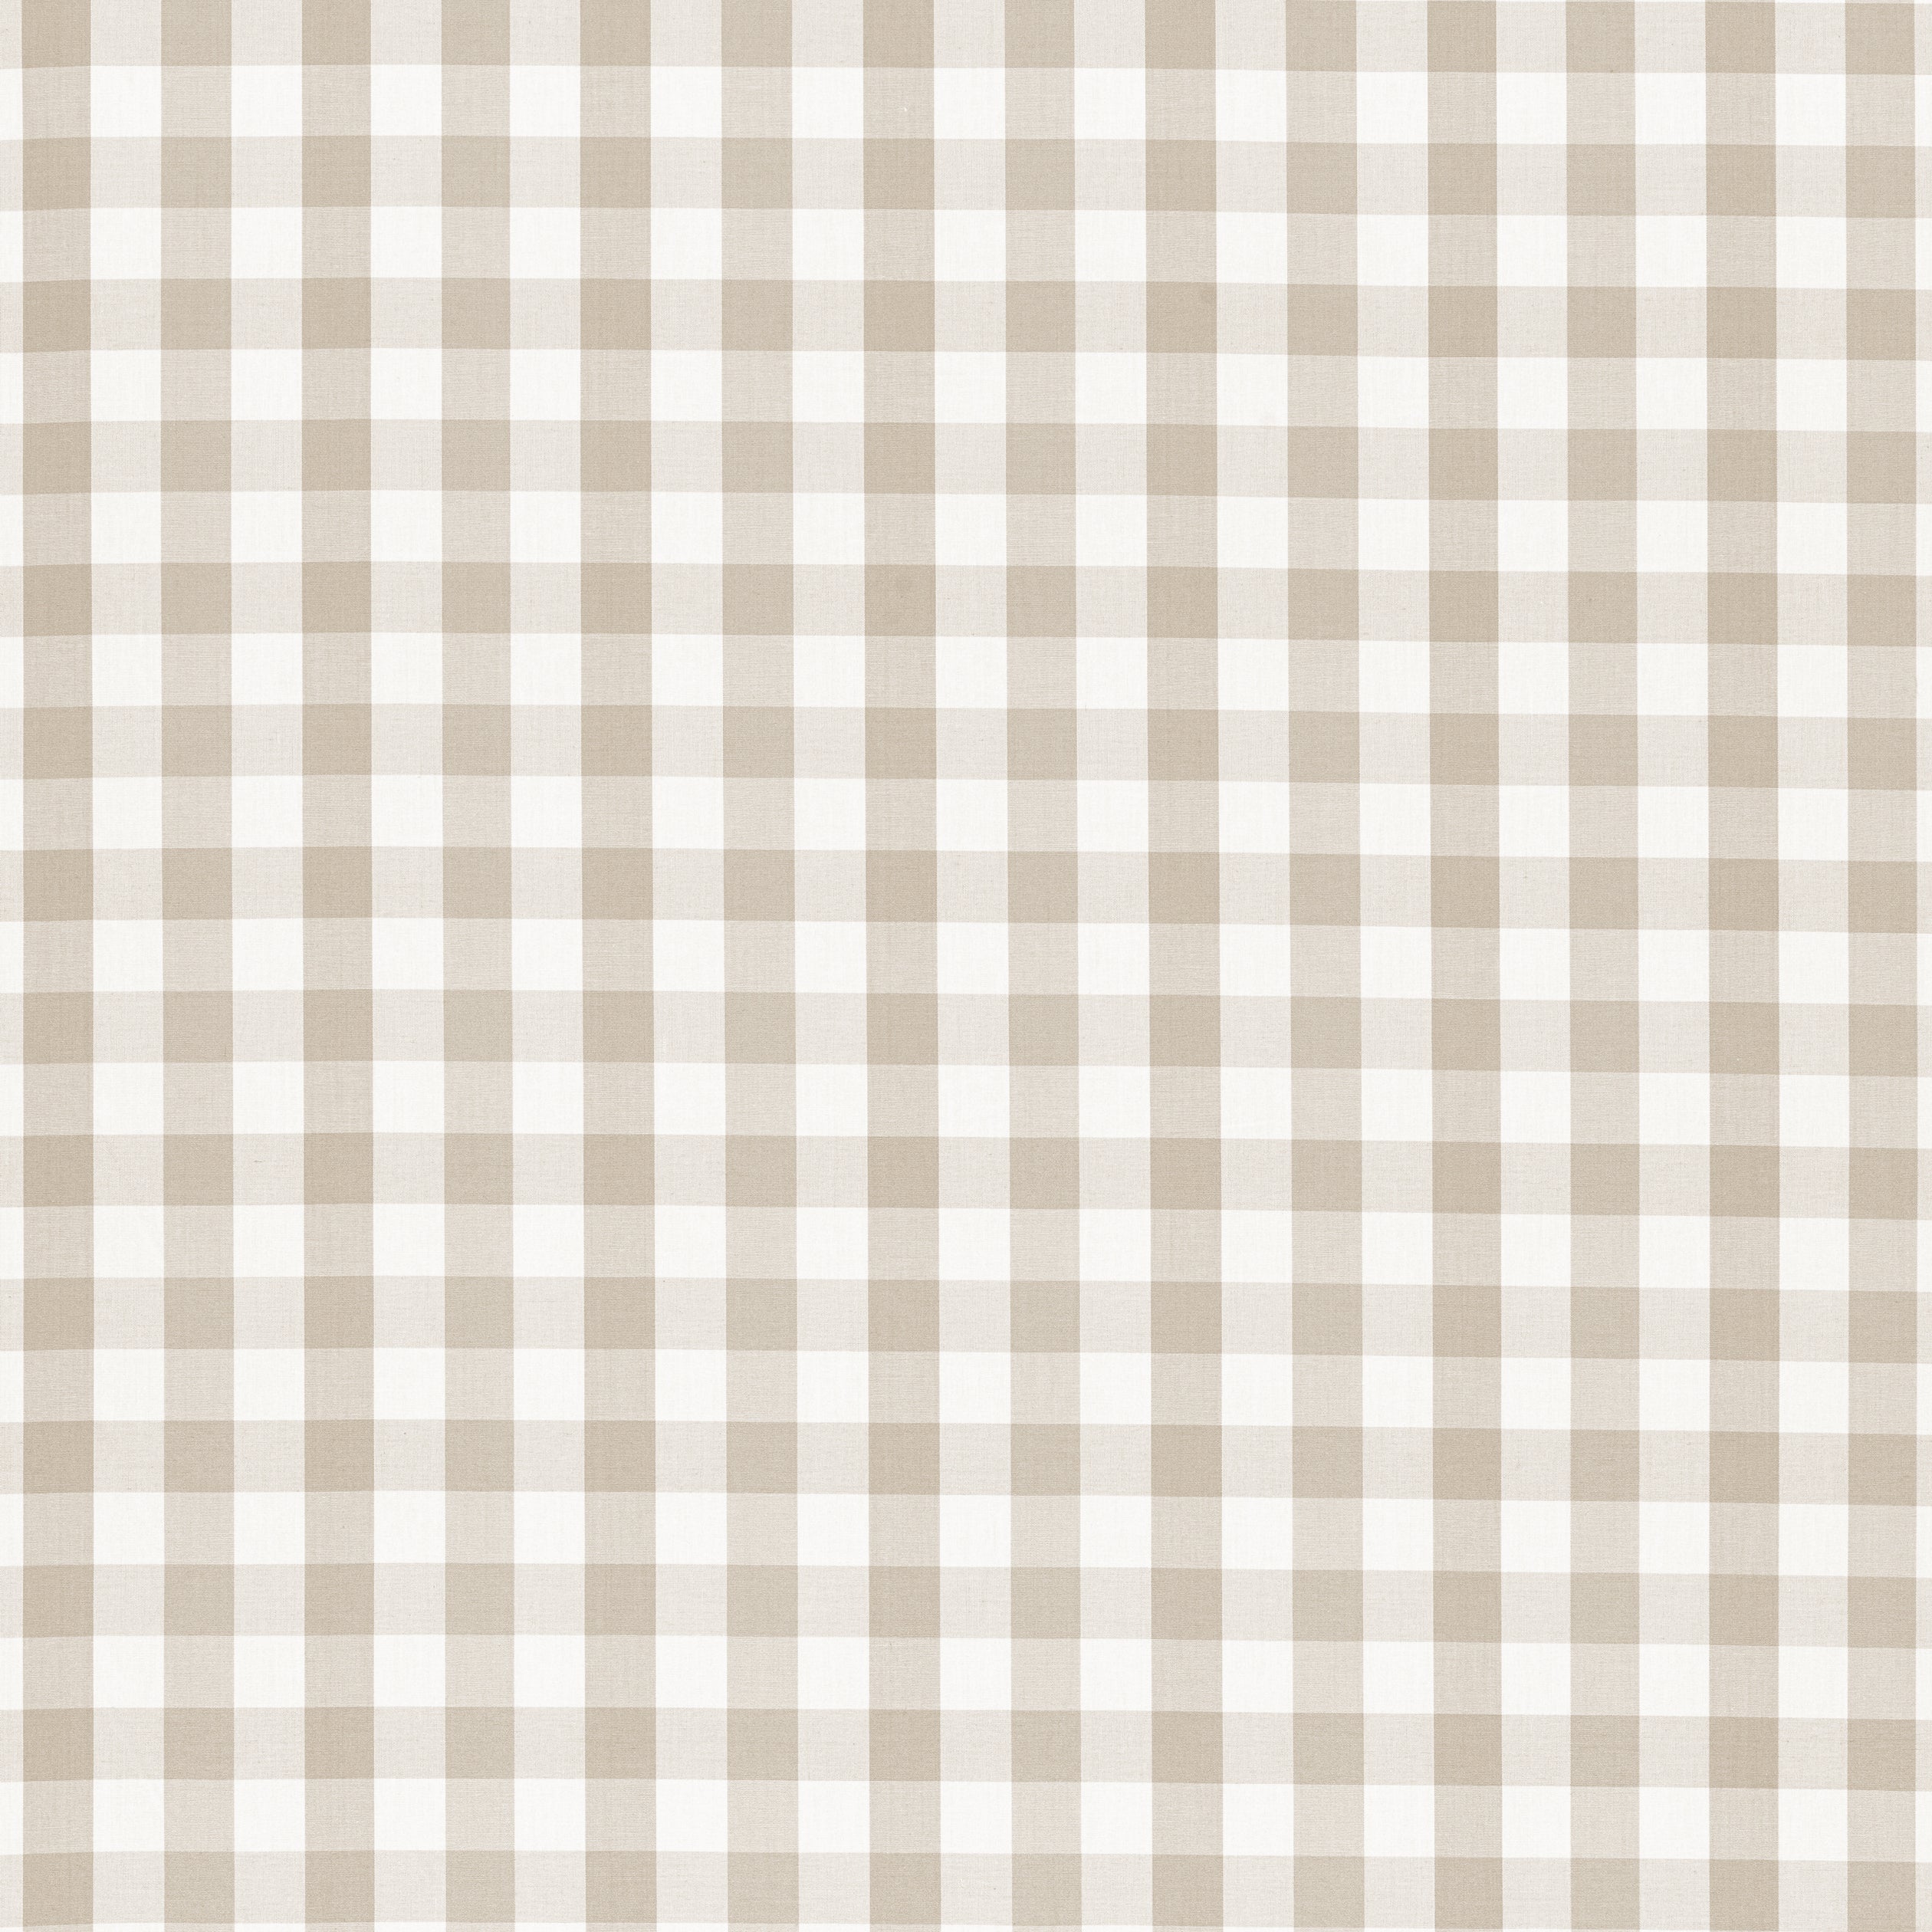 Saybrook Check fabric in beige color - pattern number AW15143 - by Anna French in the Antilles collection